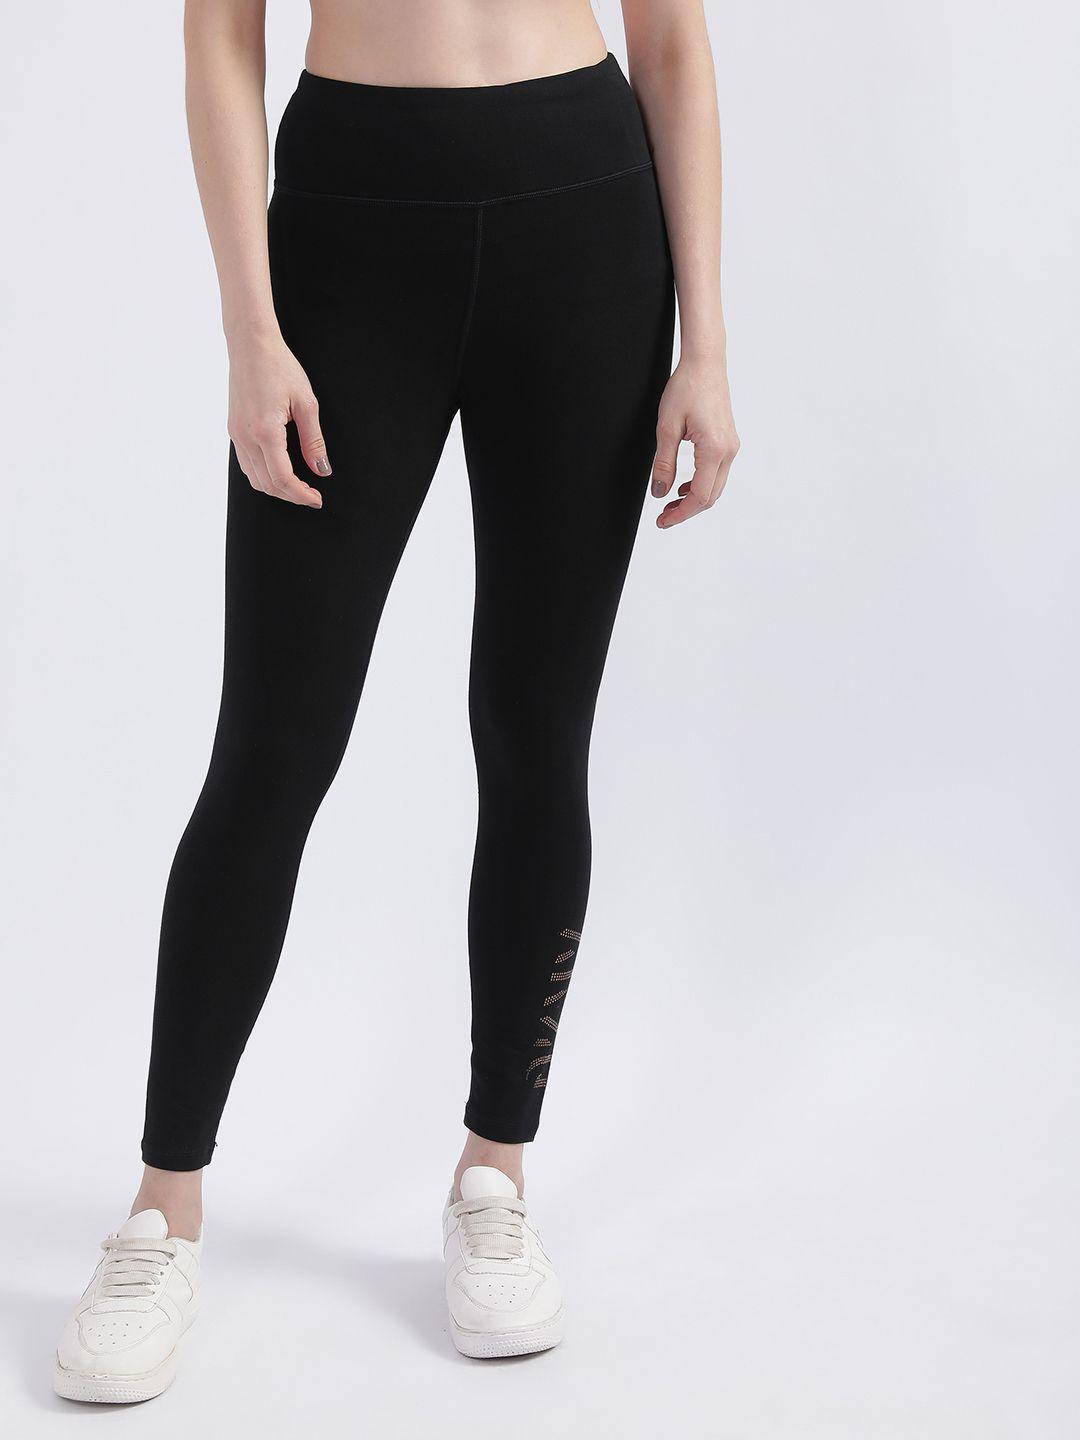 dkny slim-fit ankle-length gym tights